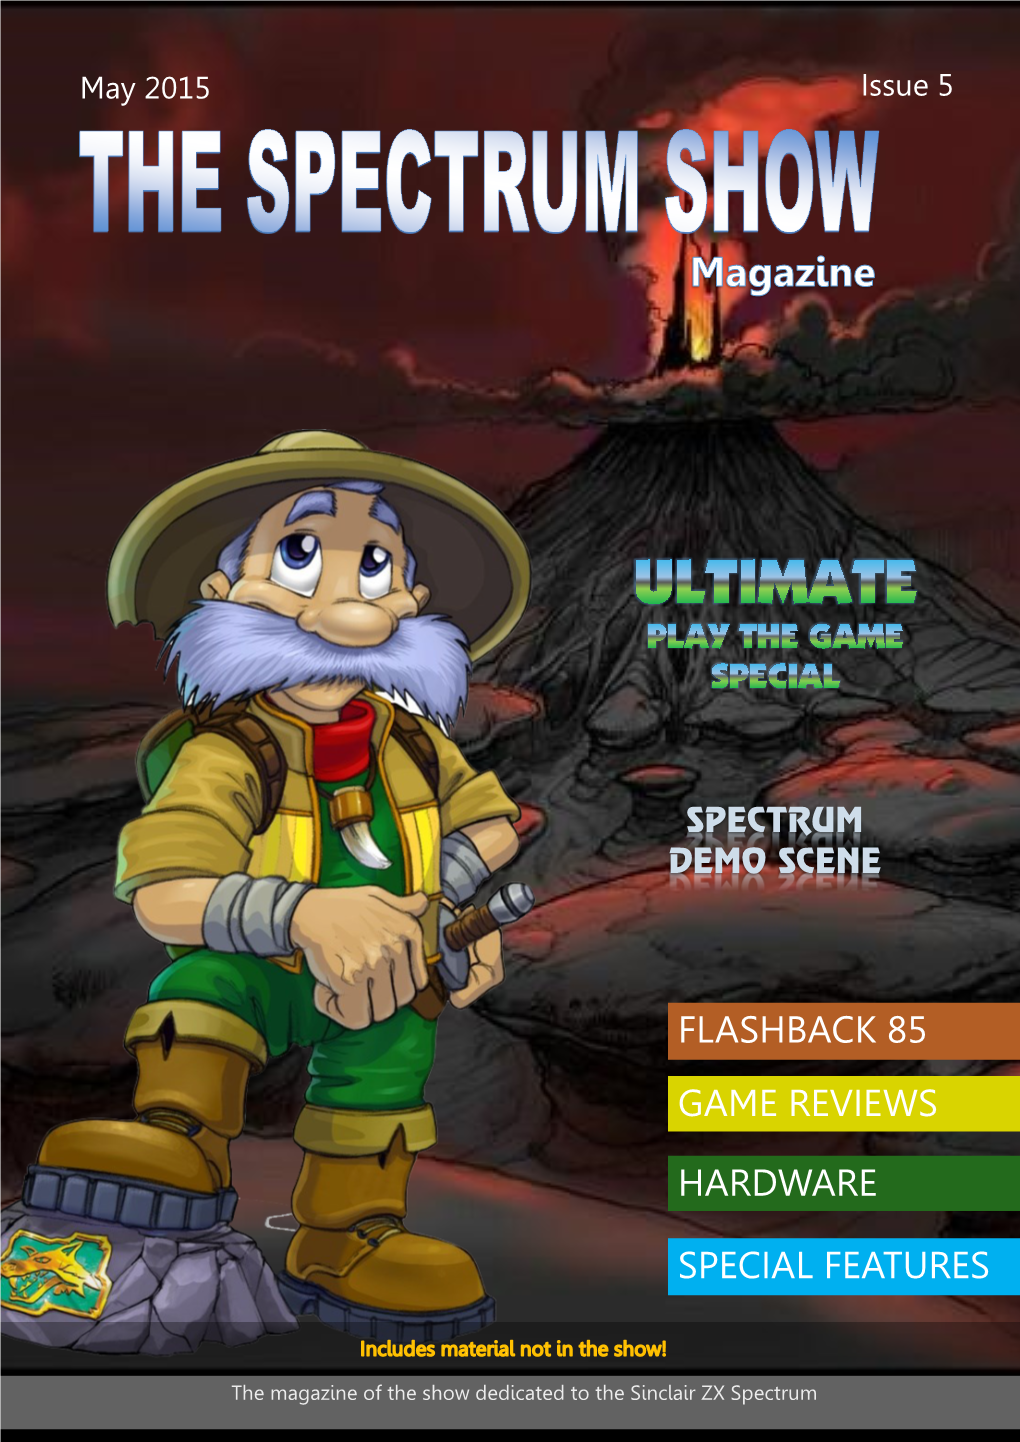 Flashback 85 Game Reviews Hardware Special Features